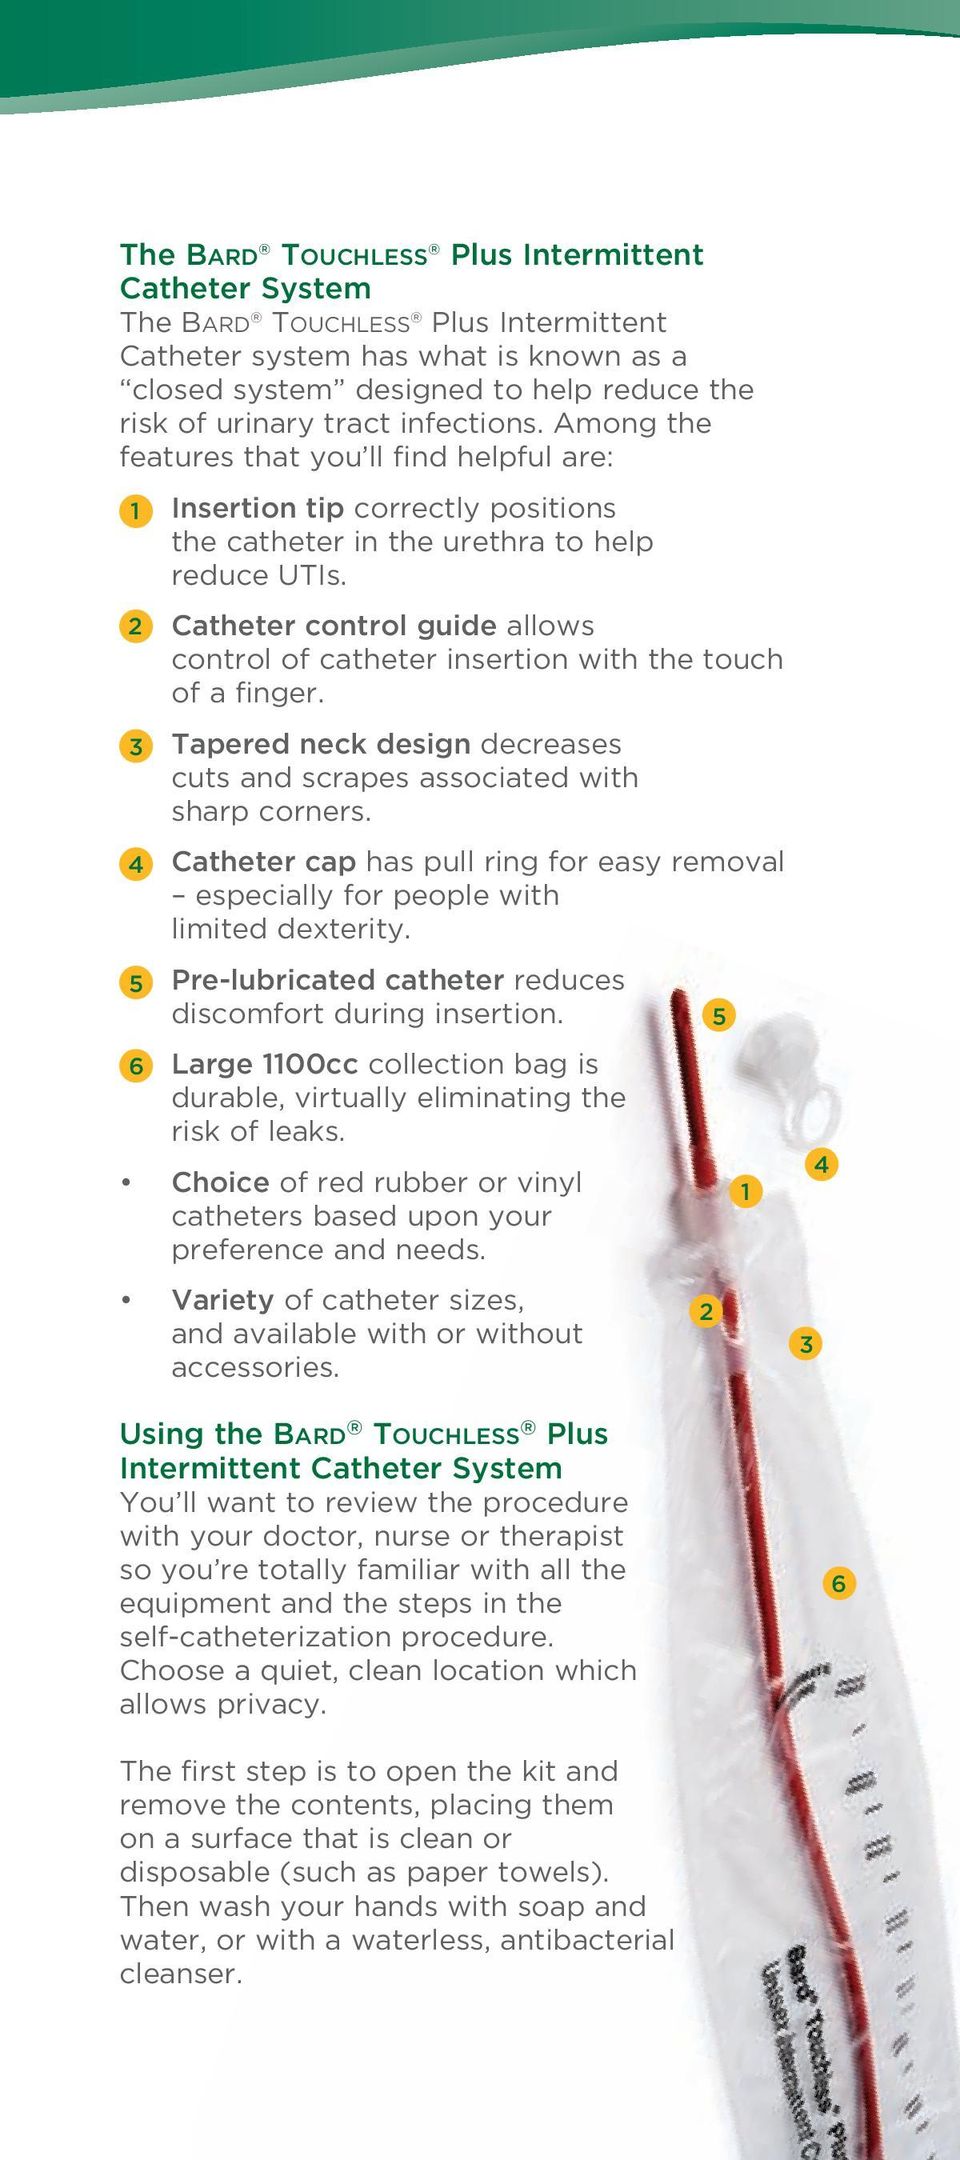 Catheter control guide allows control of catheter insertion with the touch of a finger. Tapered neck design decreases cuts and scrapes associated with sharp corners.